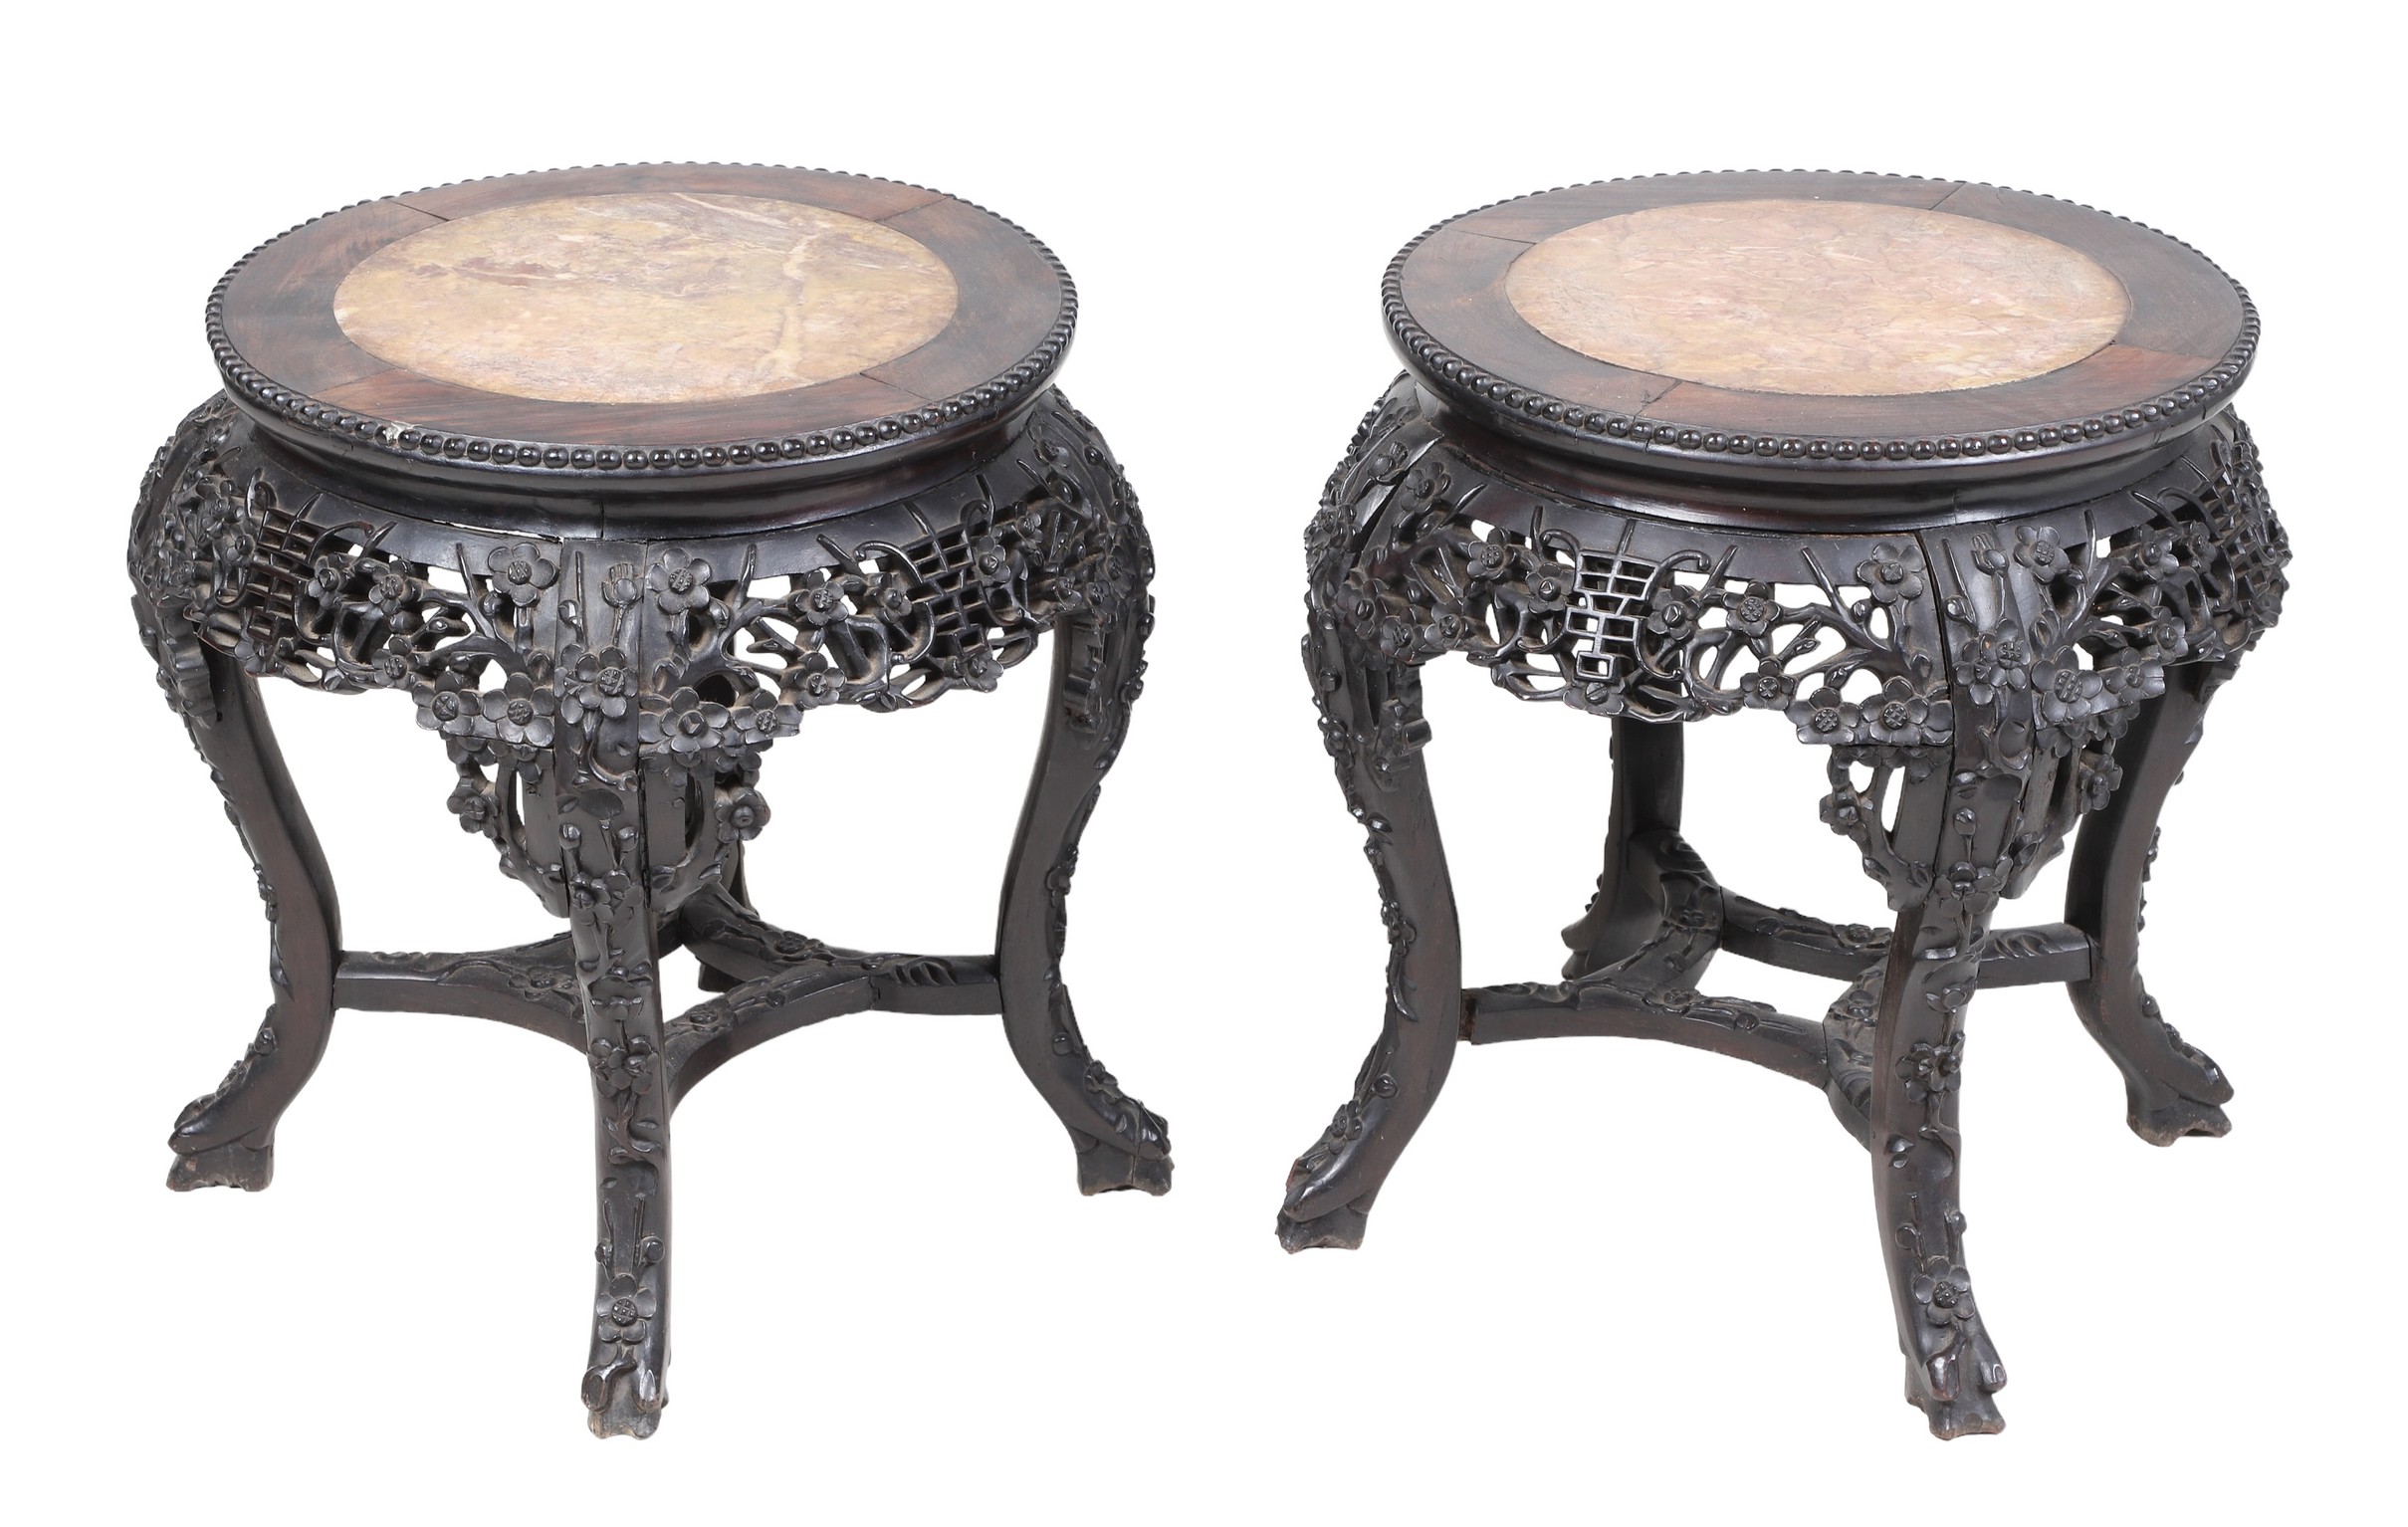 Pair of carved wood Chinese stands 2e0f68